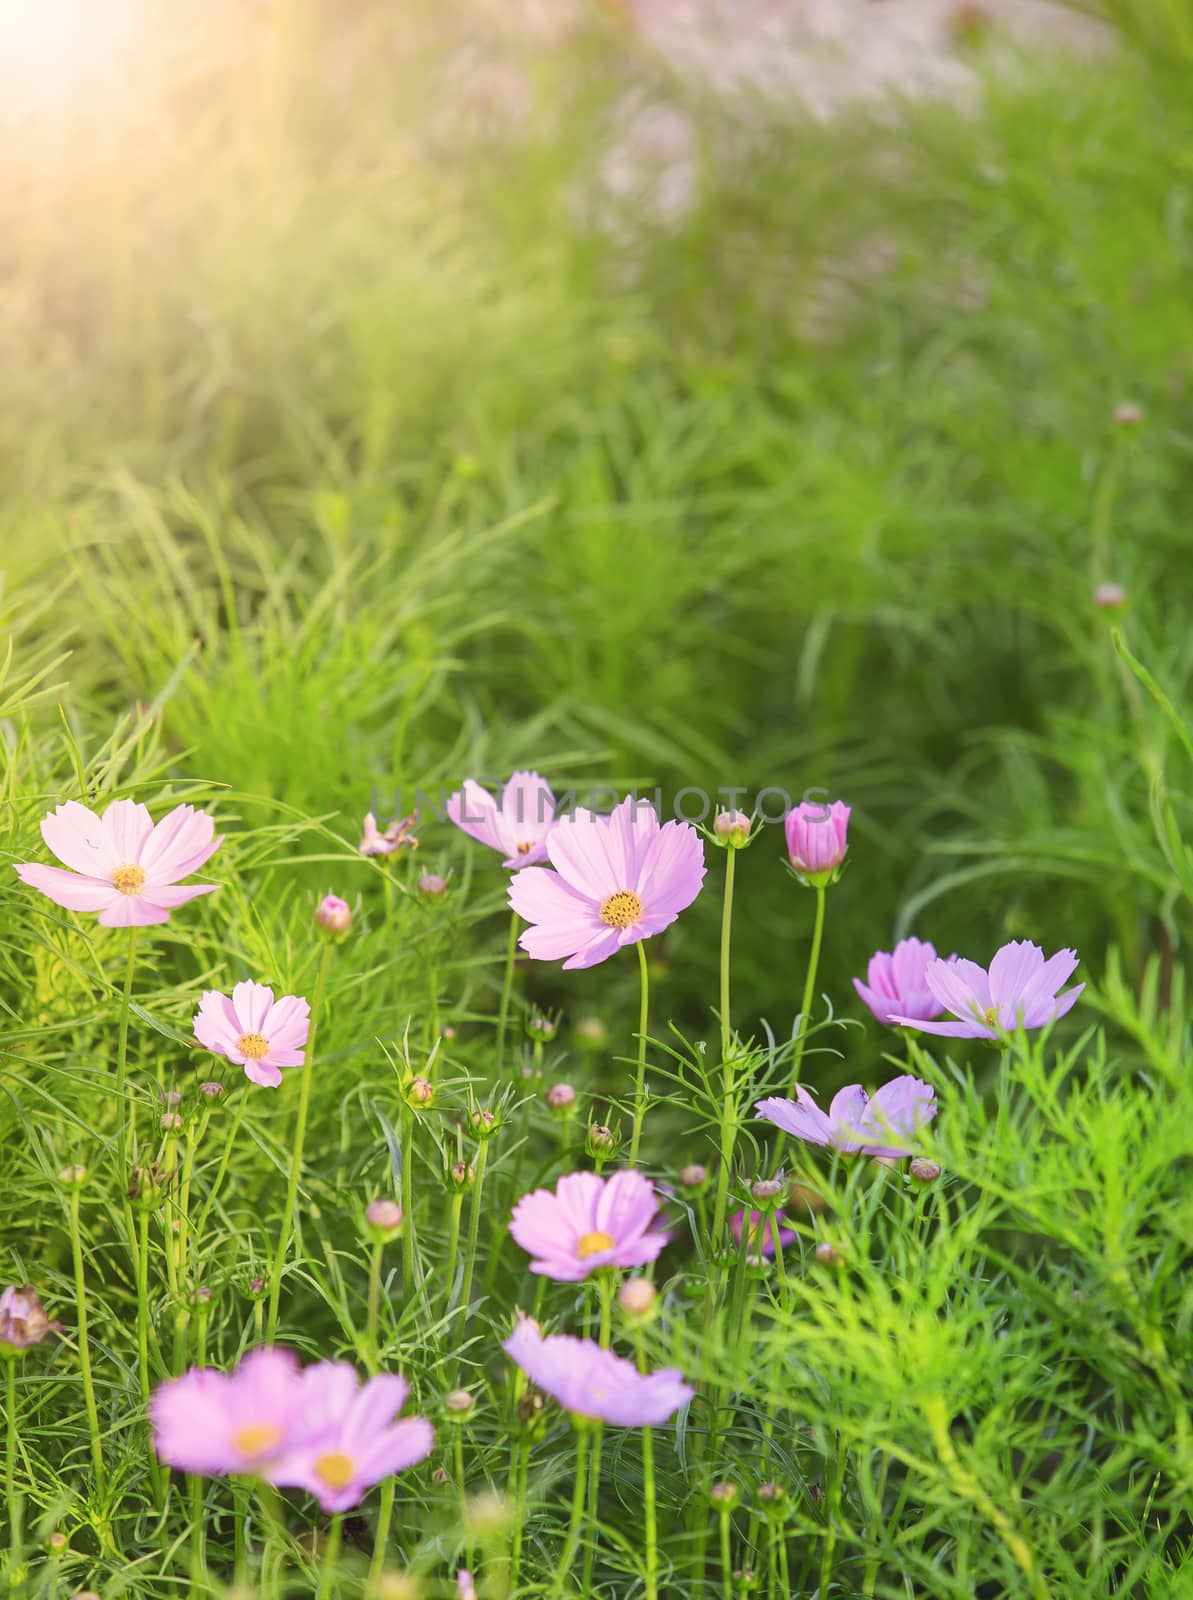 violet color of cosmos flowers in green leaves field use as natural background,backdrop,copy space